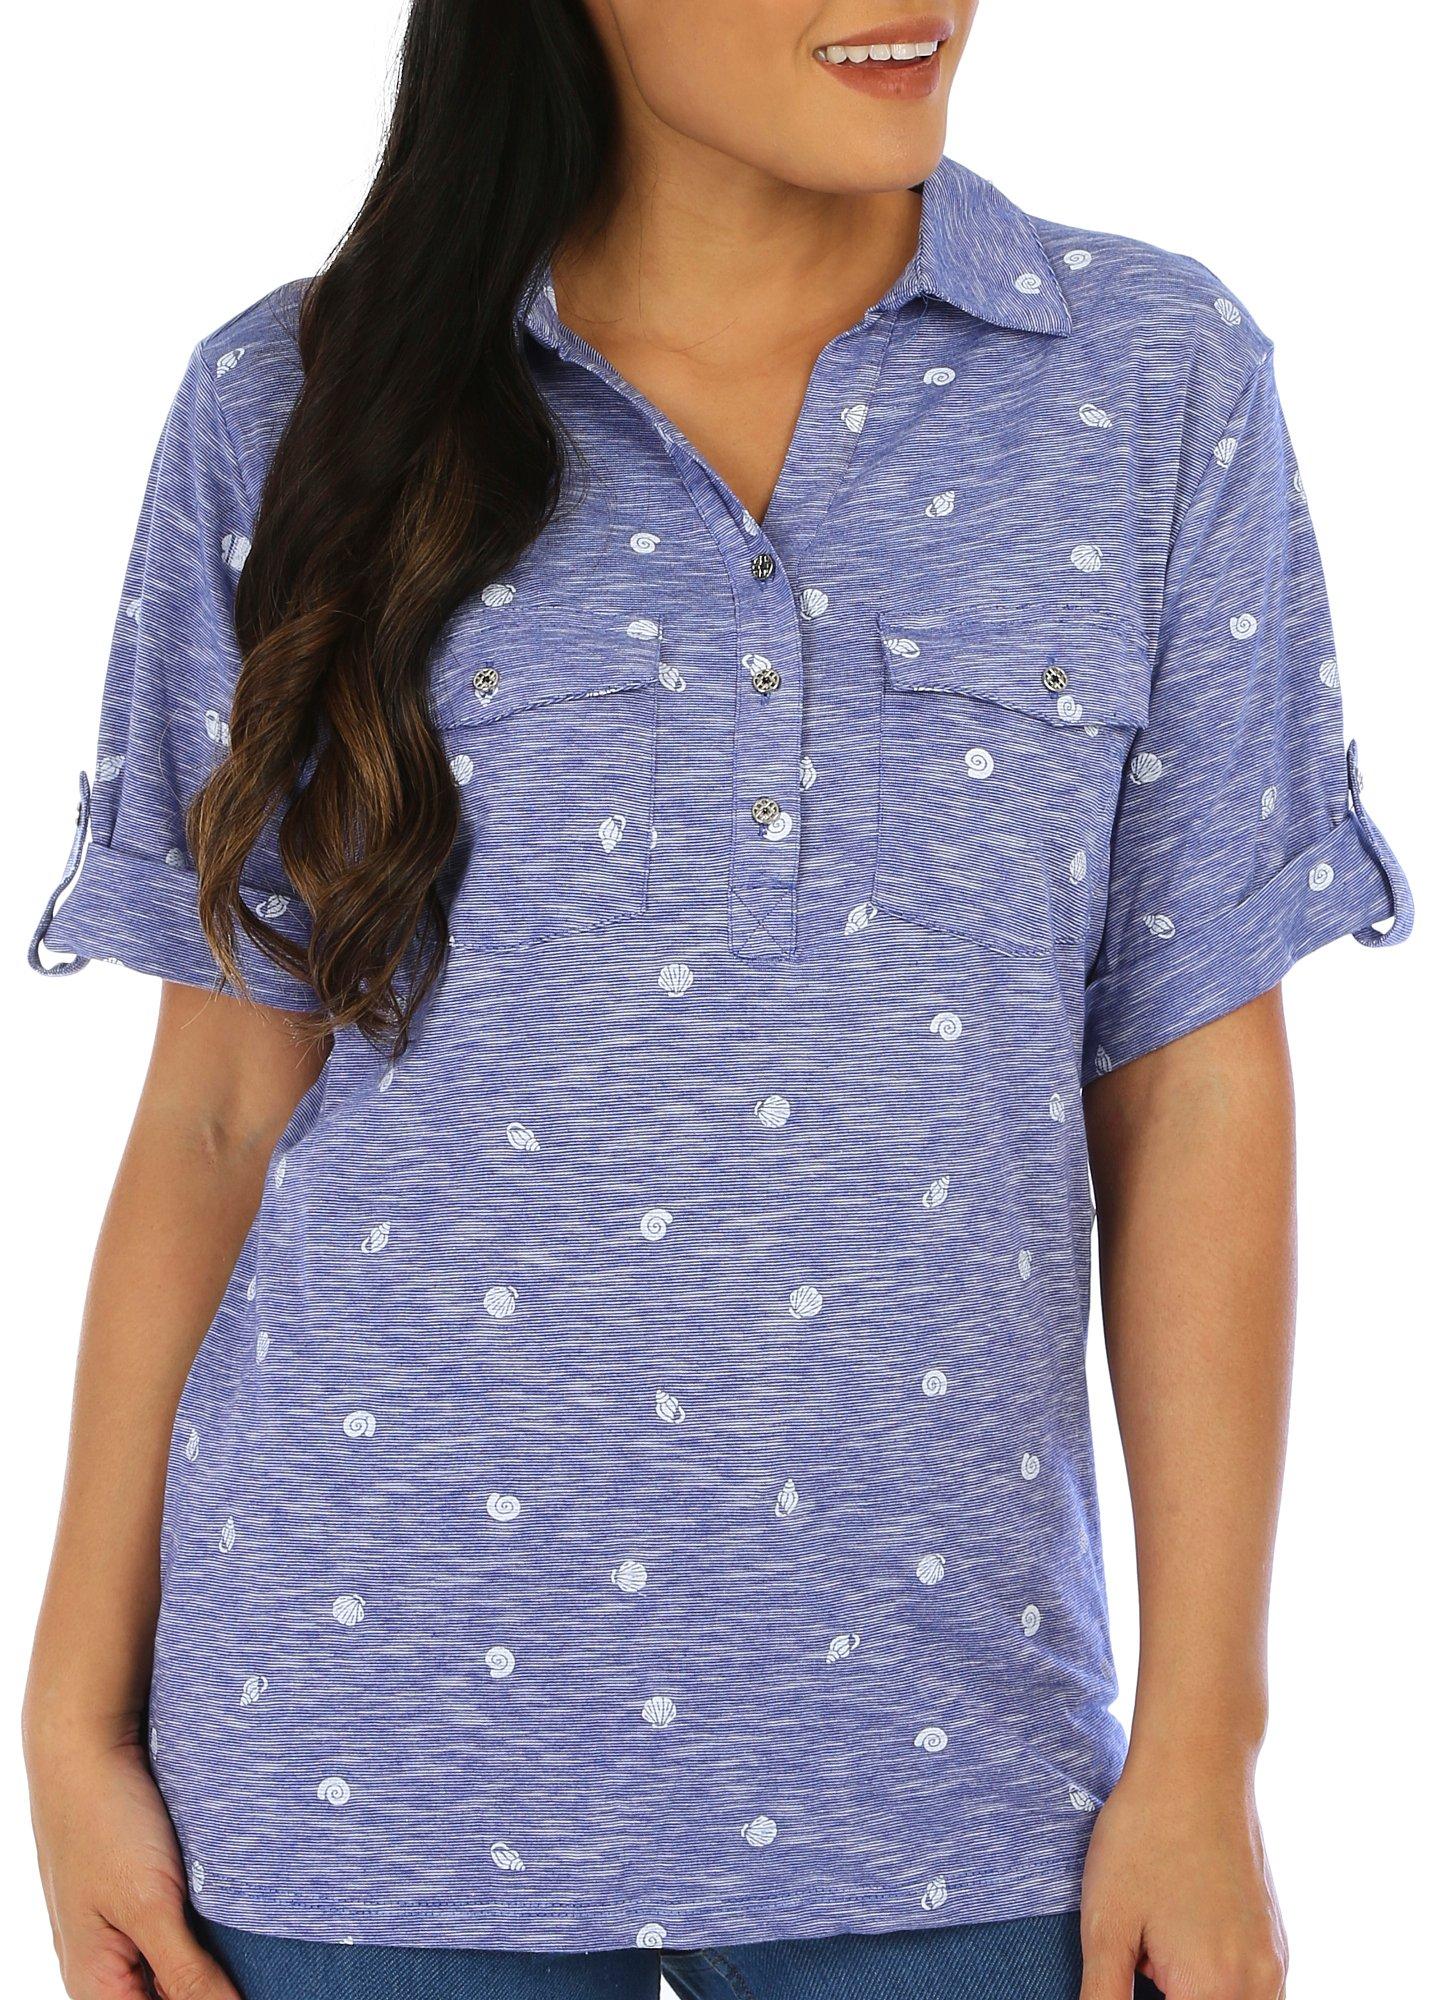 Misses Shell Space Dye Short Sleeve Polo